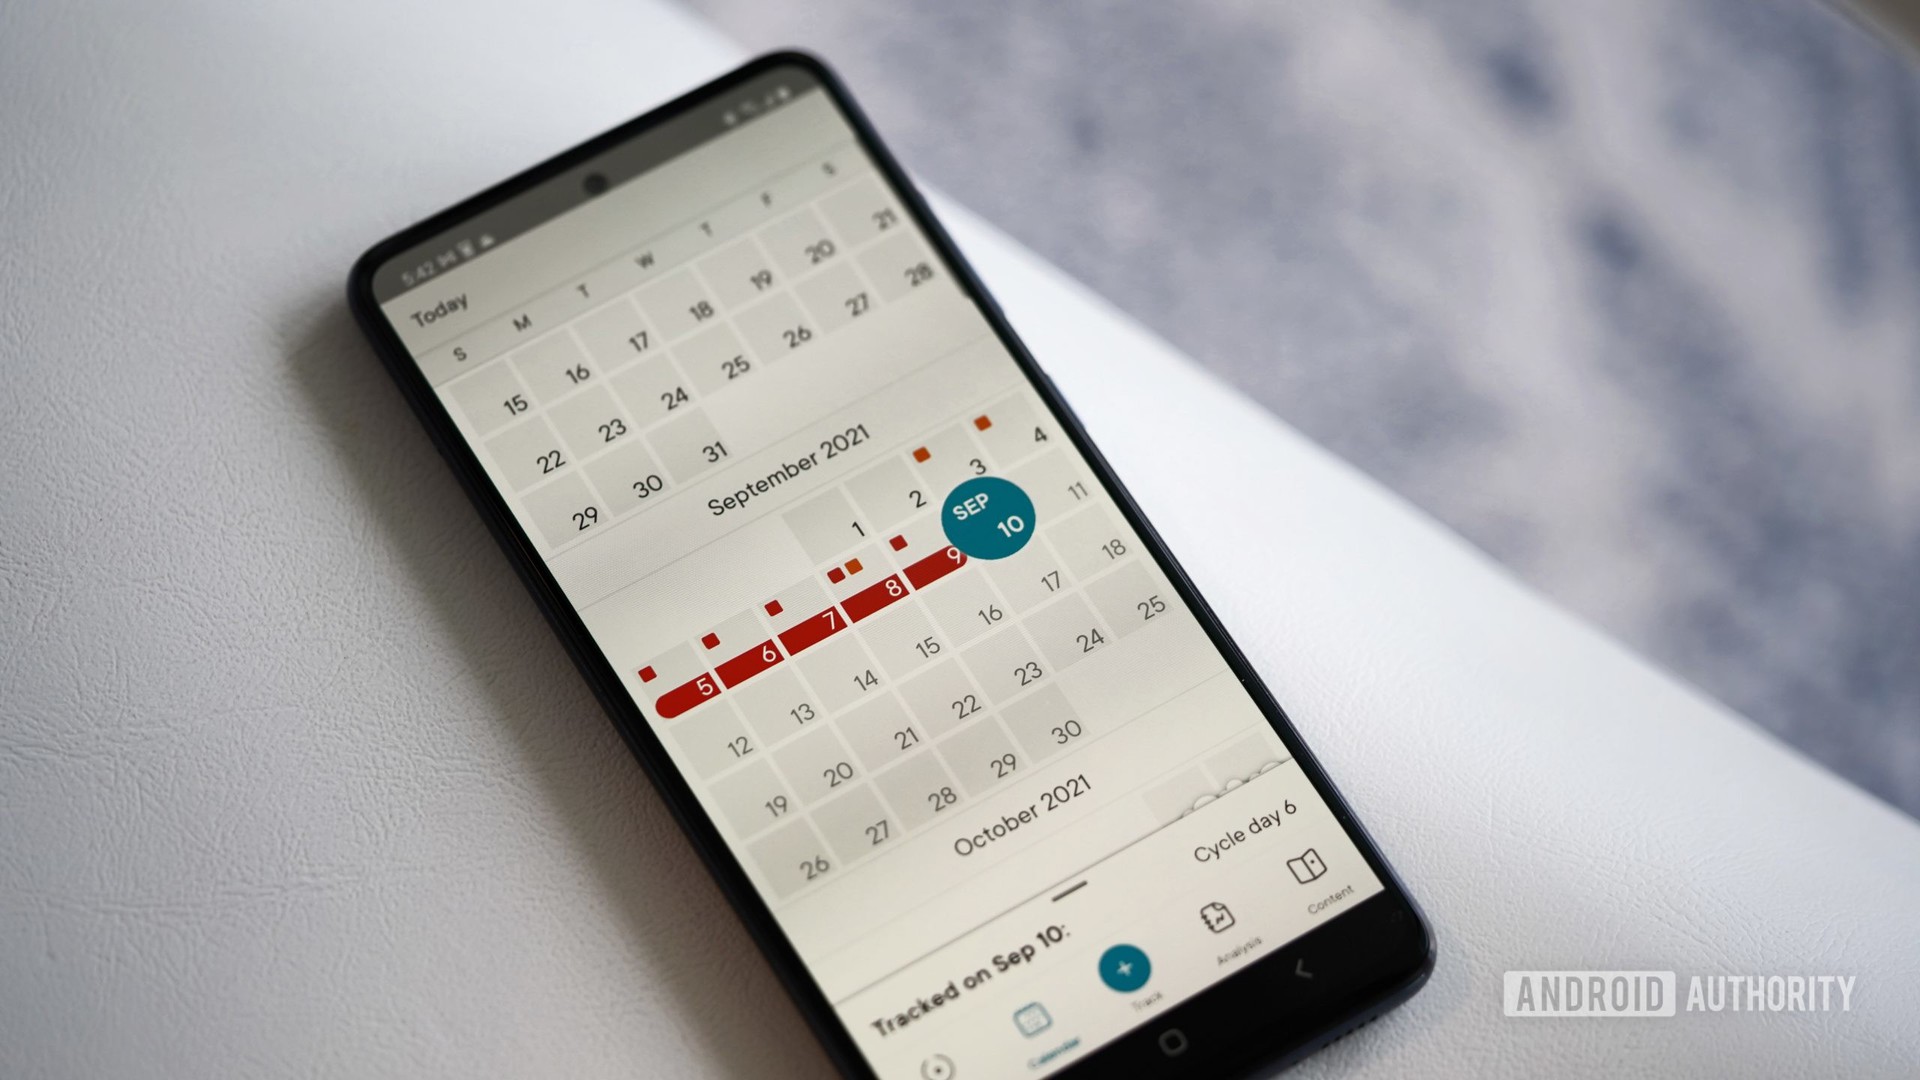 A Galaxy A51, open to the Clue app tracking calendar, rests on a white leather chair.